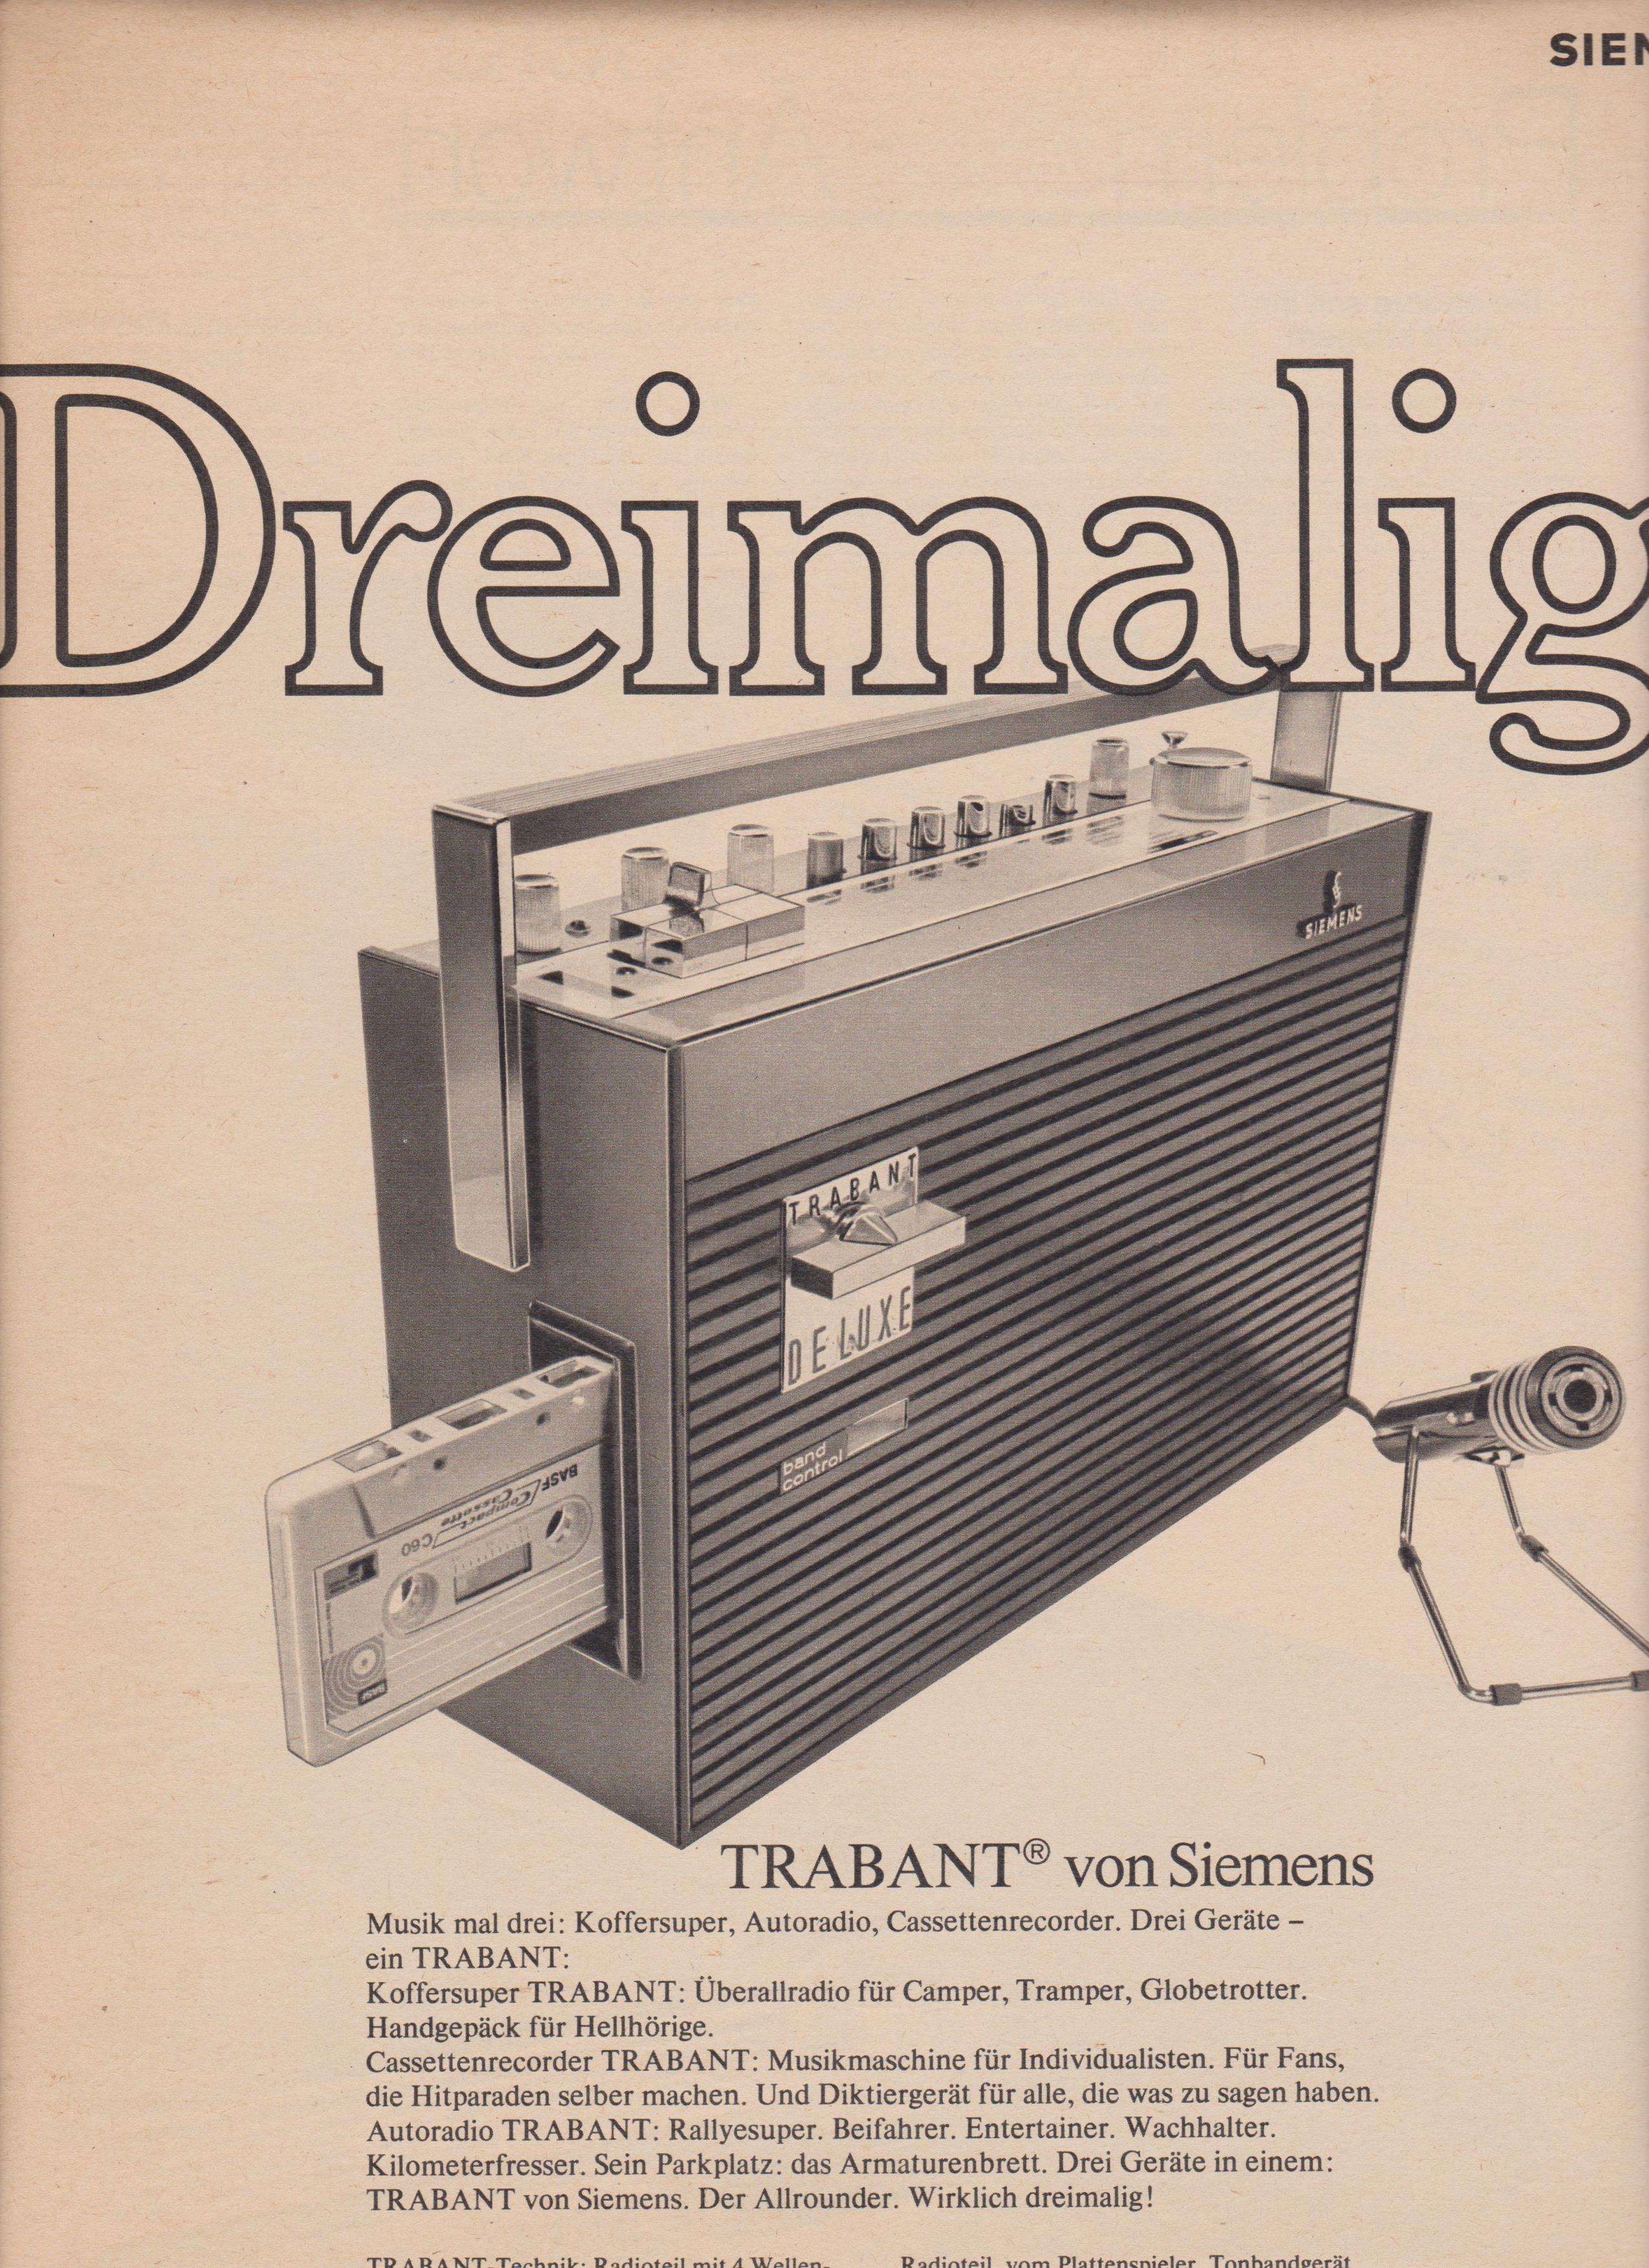 Siemens TRABANT DE LUXE – car cassette recorder and portable radio in one (Source: BSH Corporate Archives, C02-0126).